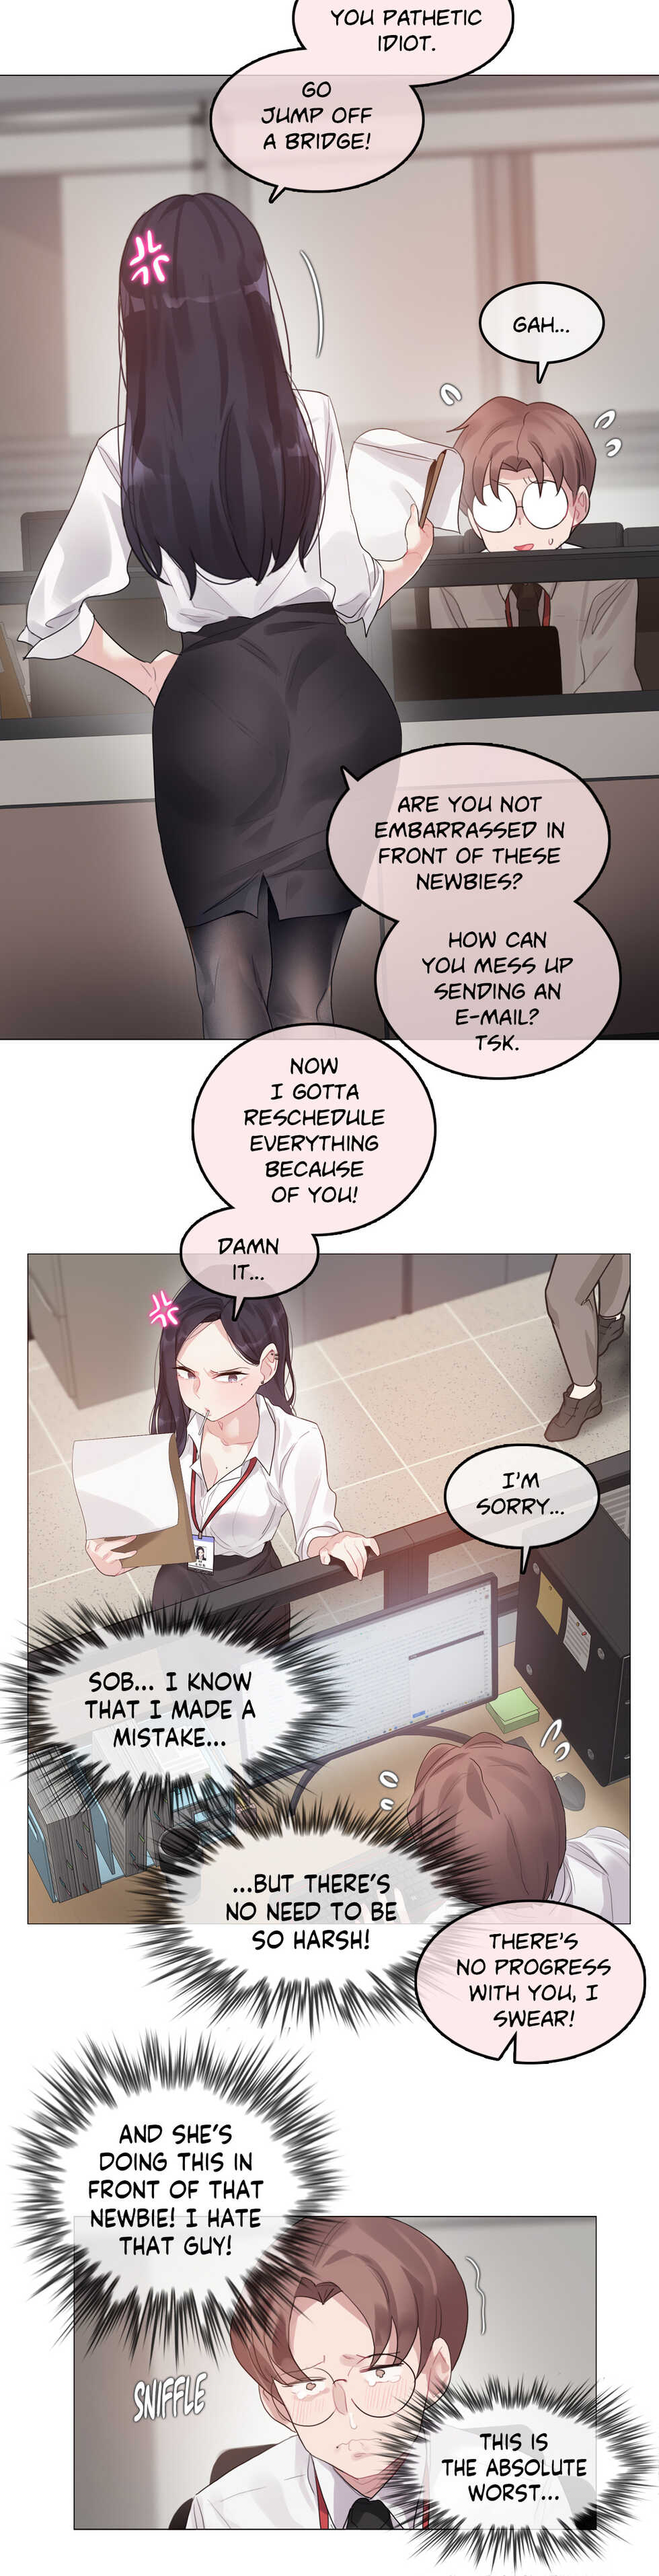 [Alice Crazy] Perverts' Daily Lives Episode 4: Sugar Sugar Chihuahua (Complete) - Page 28